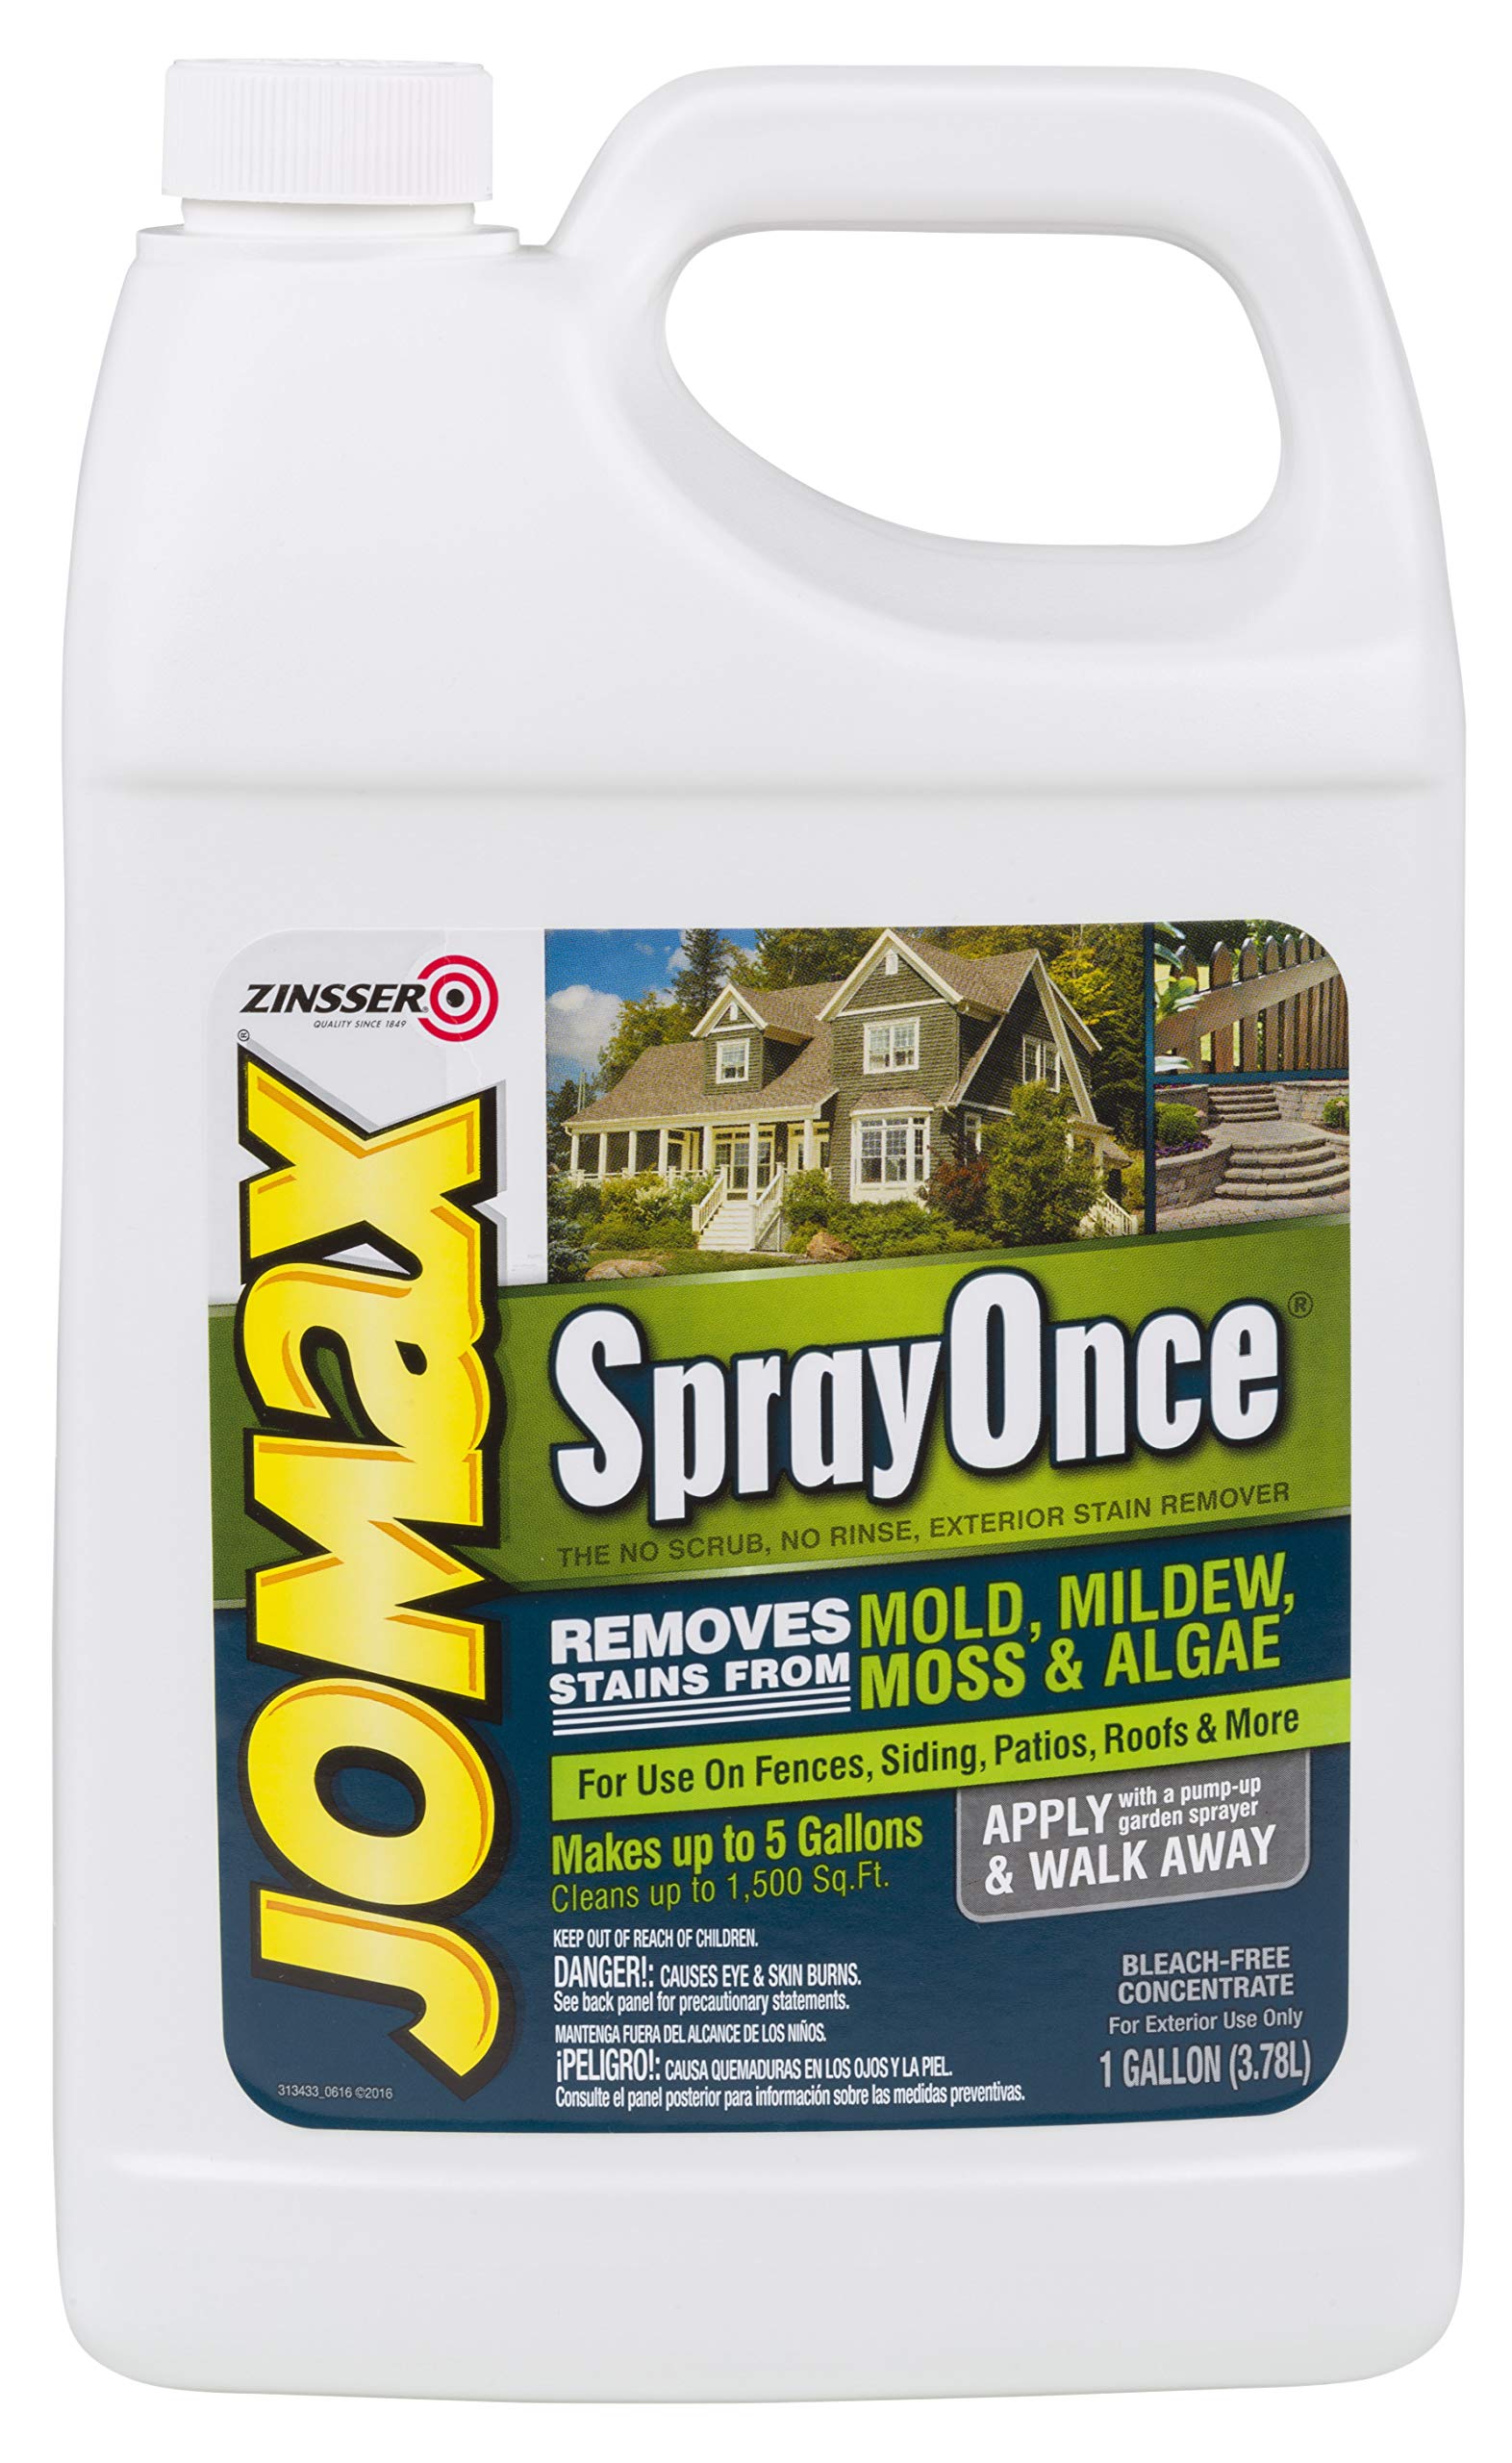 Rust-Oleum Jomax (removes stains on siding, fences, decks, patios, roofs), 1 gallon, $6.97